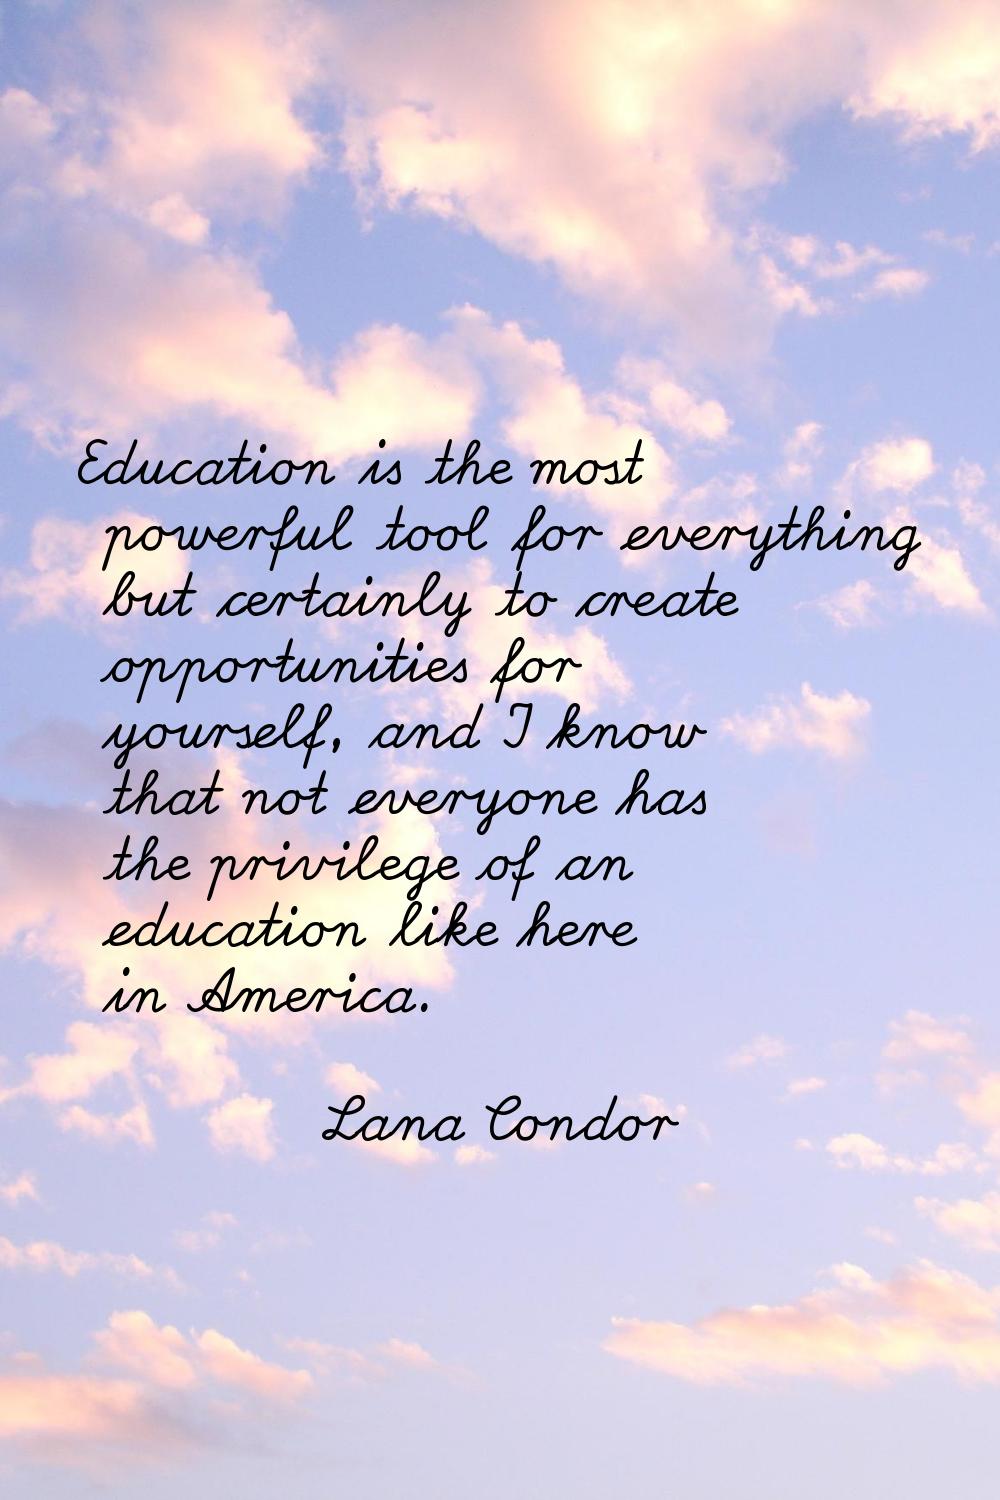 Education is the most powerful tool for everything but certainly to create opportunities for yourse